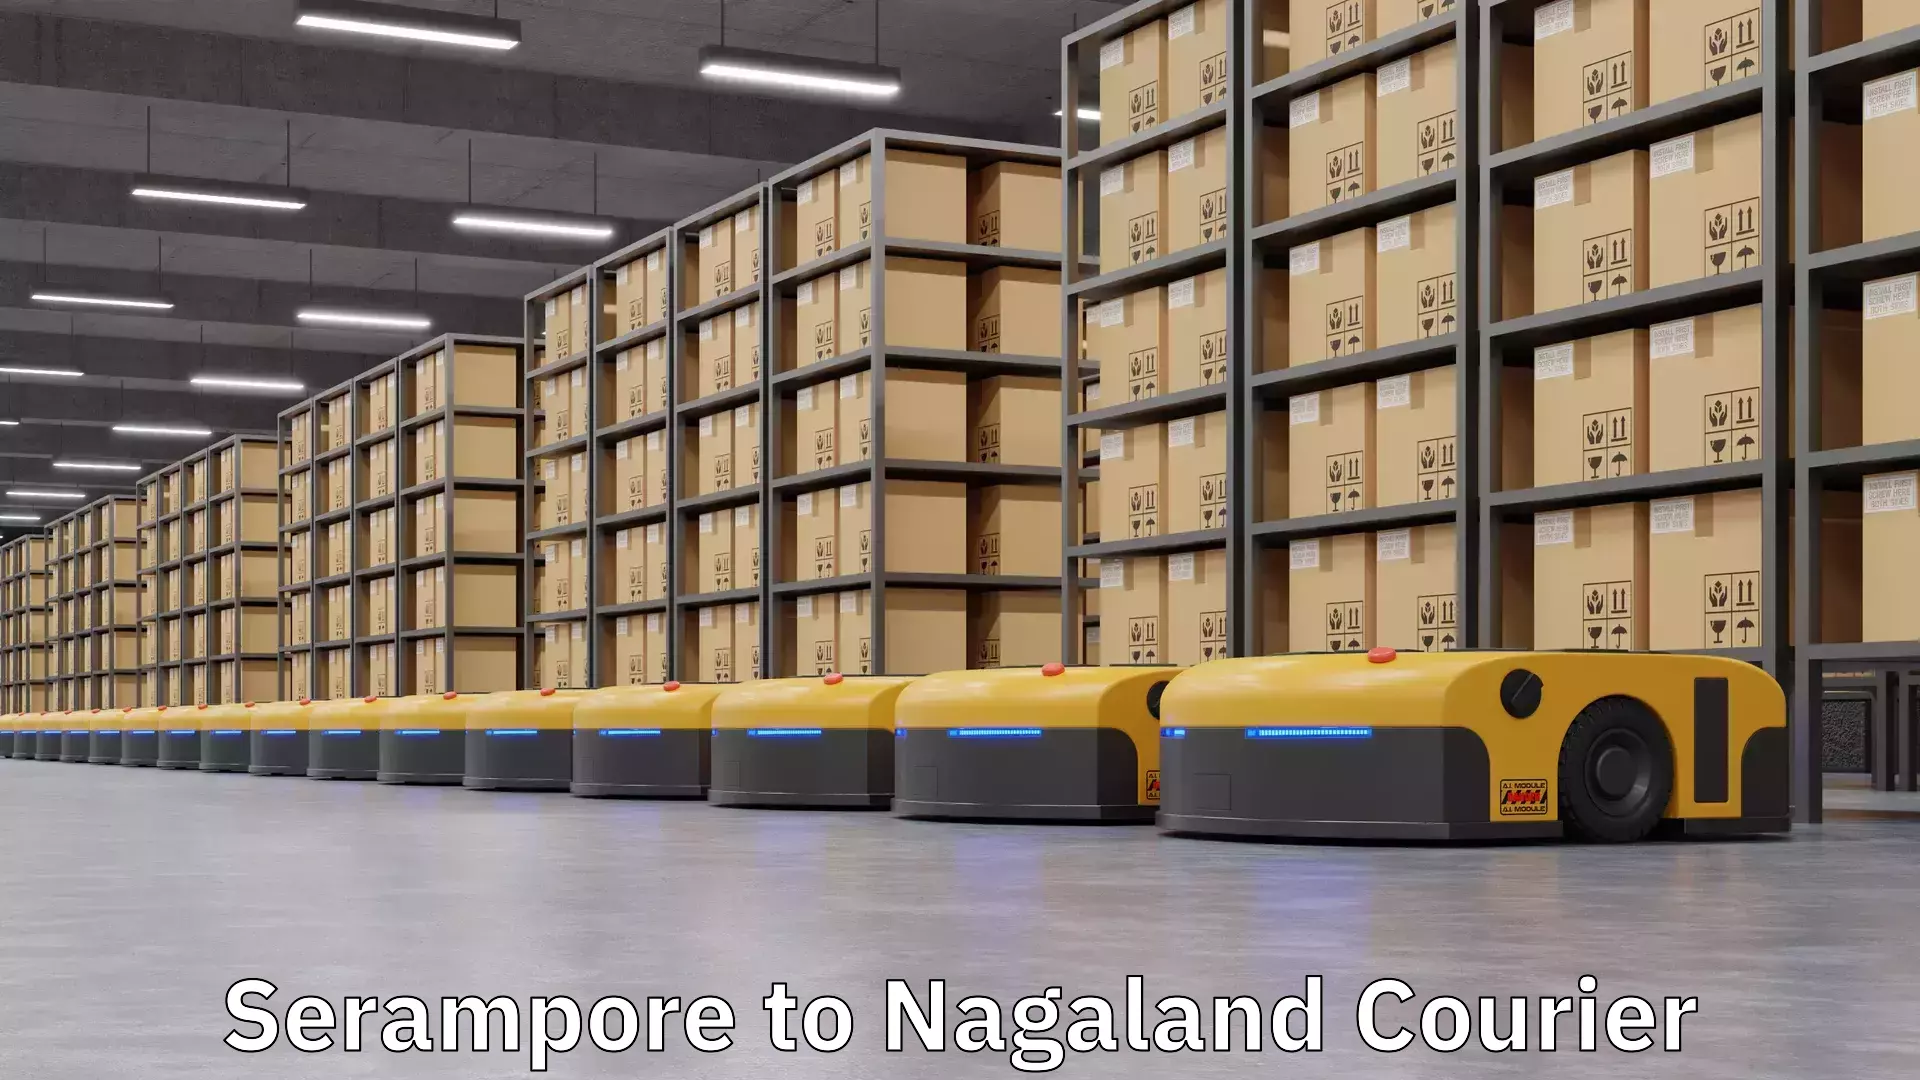 Next day courier in Serampore to Nagaland